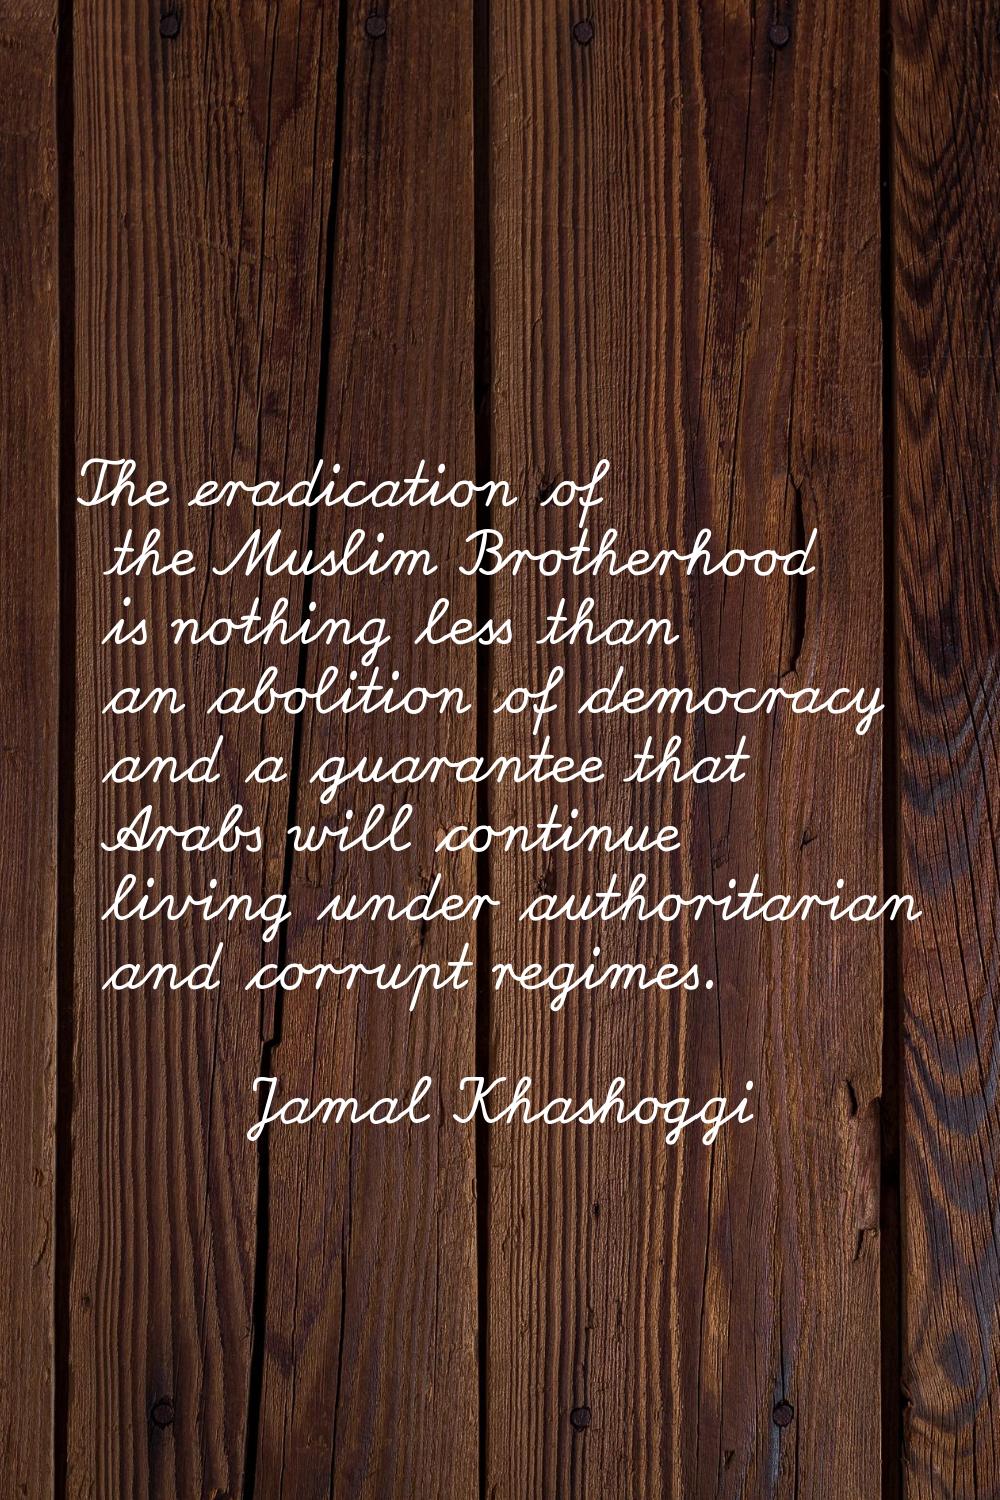 The eradication of the Muslim Brotherhood is nothing less than an abolition of democracy and a guar